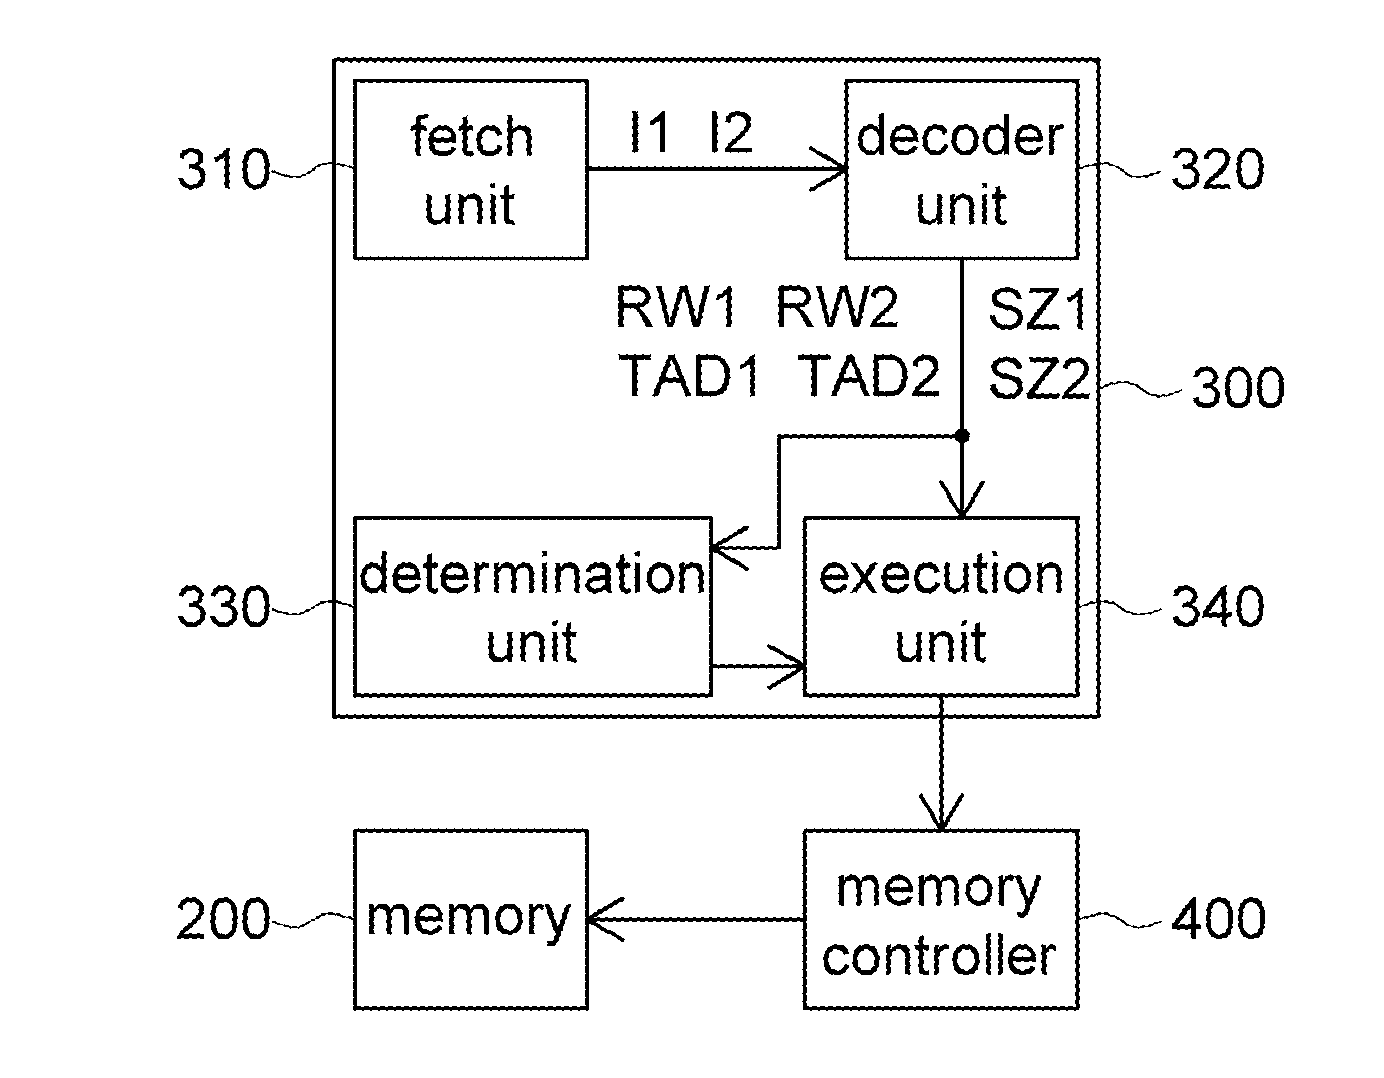 Methods and Devices for Accessing a Memory and a Central Processing Unit Using the Same